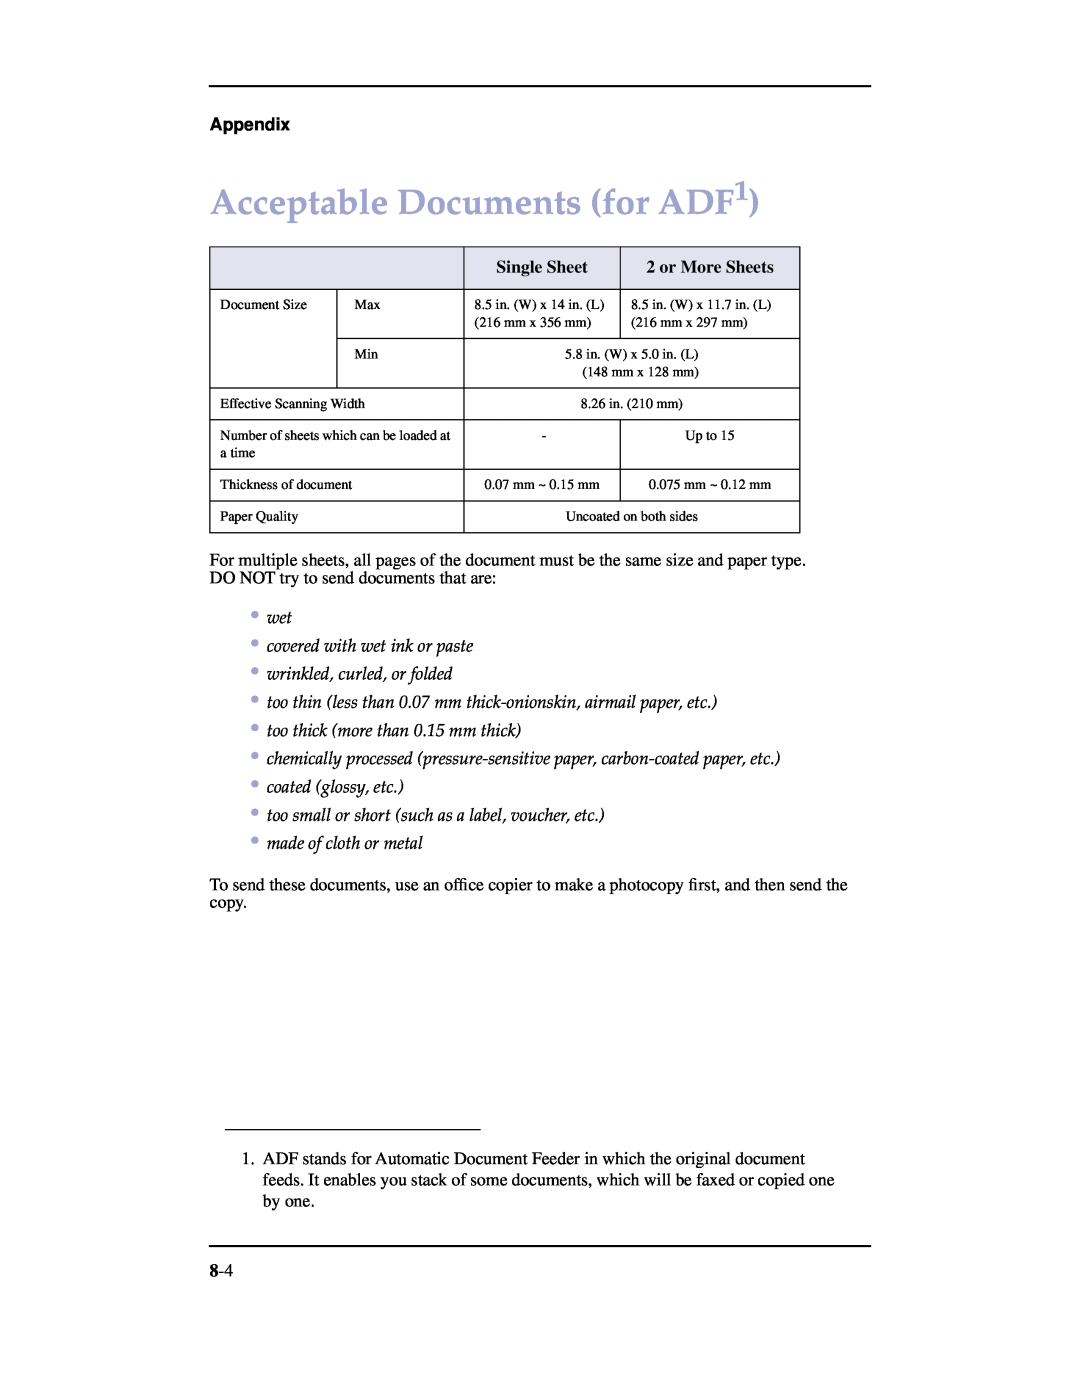 Samsung SF-3100 manual Acceptable Documents for ADF1, Single Sheet, or More Sheets, Appendix 